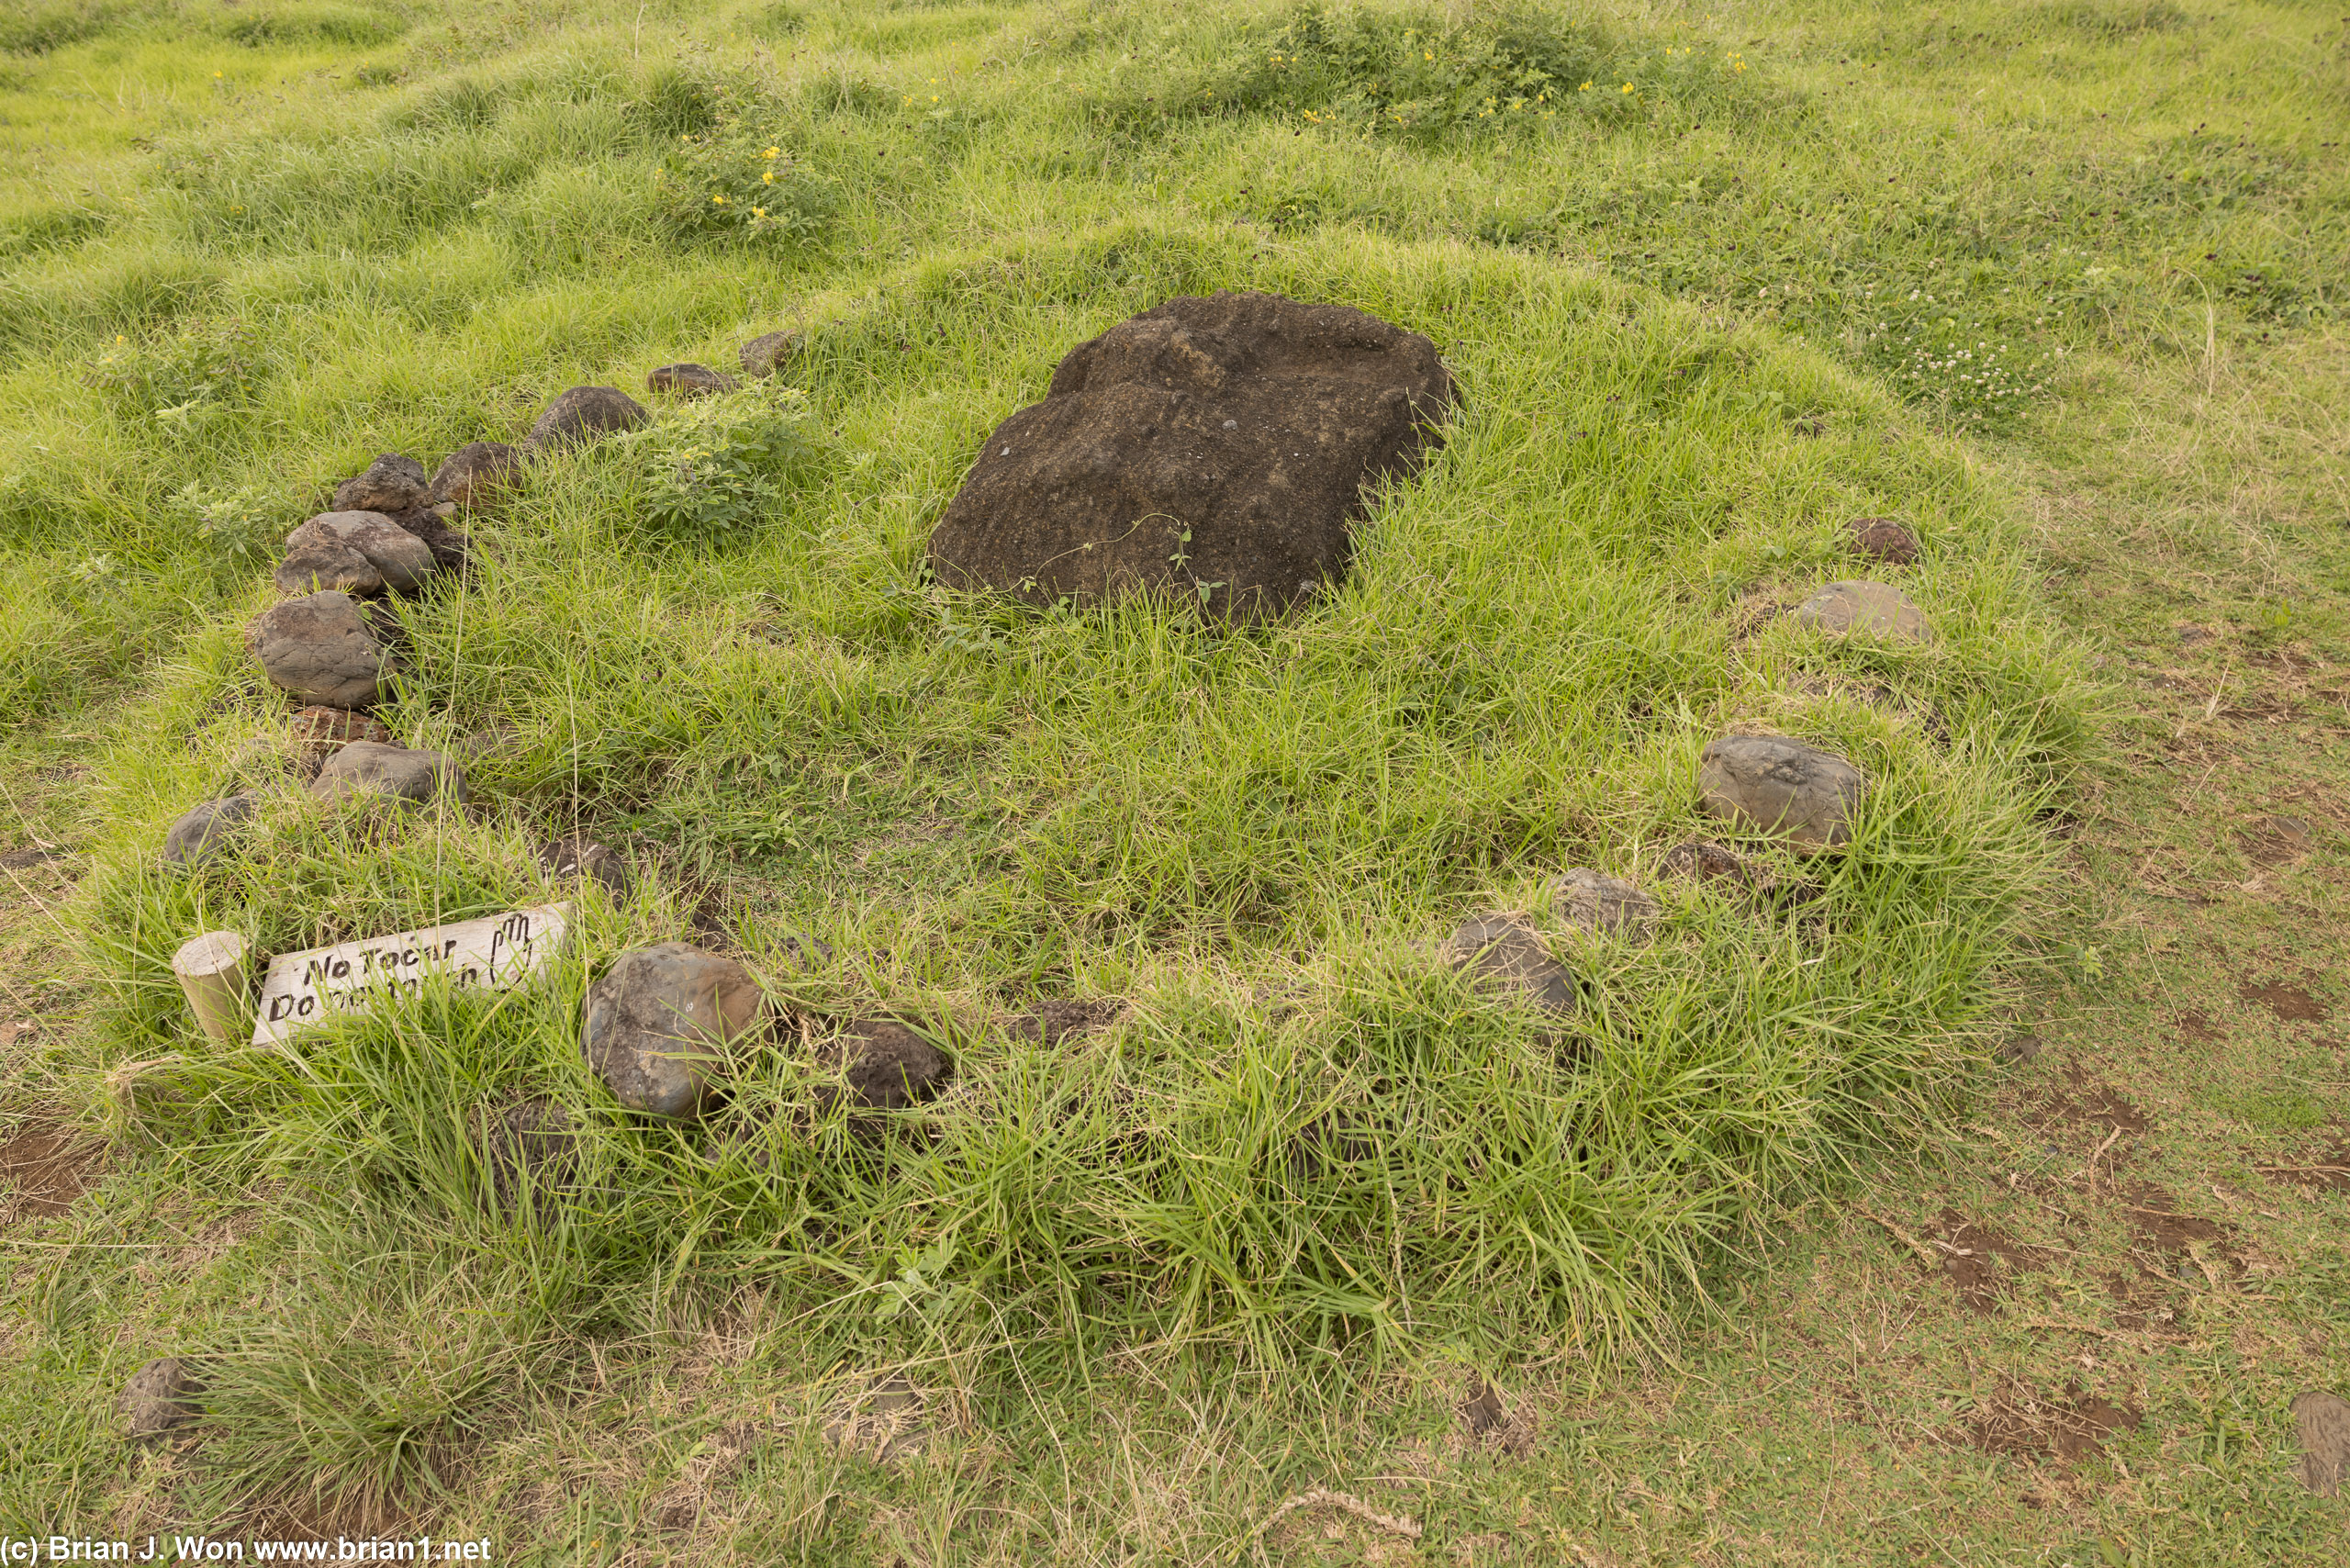 One of many partially buried moai.